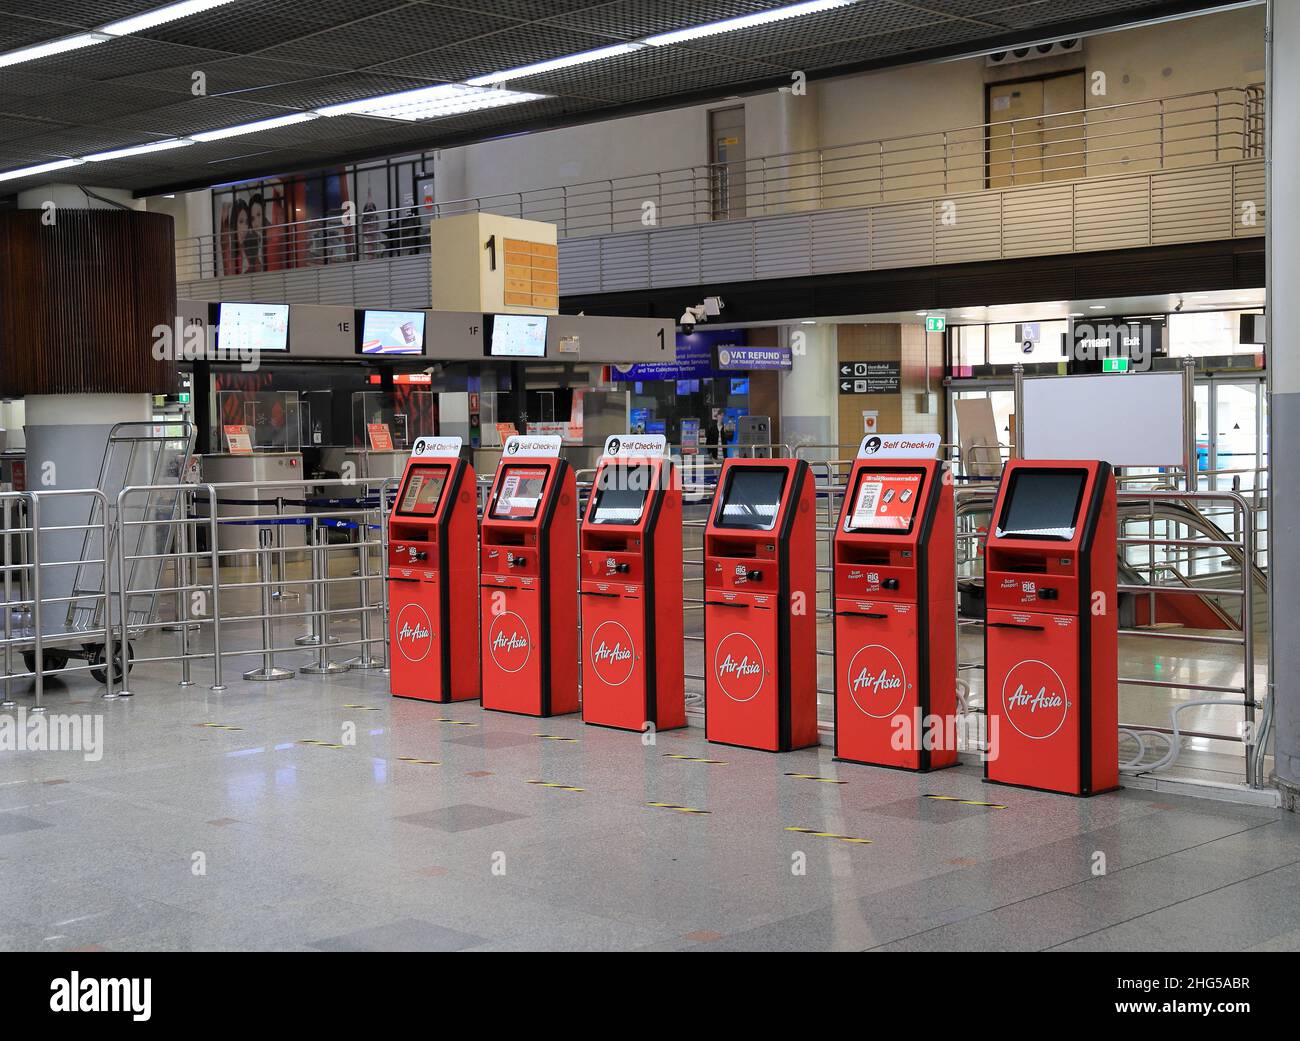 Airline ticket kiosk photography images - Alamy